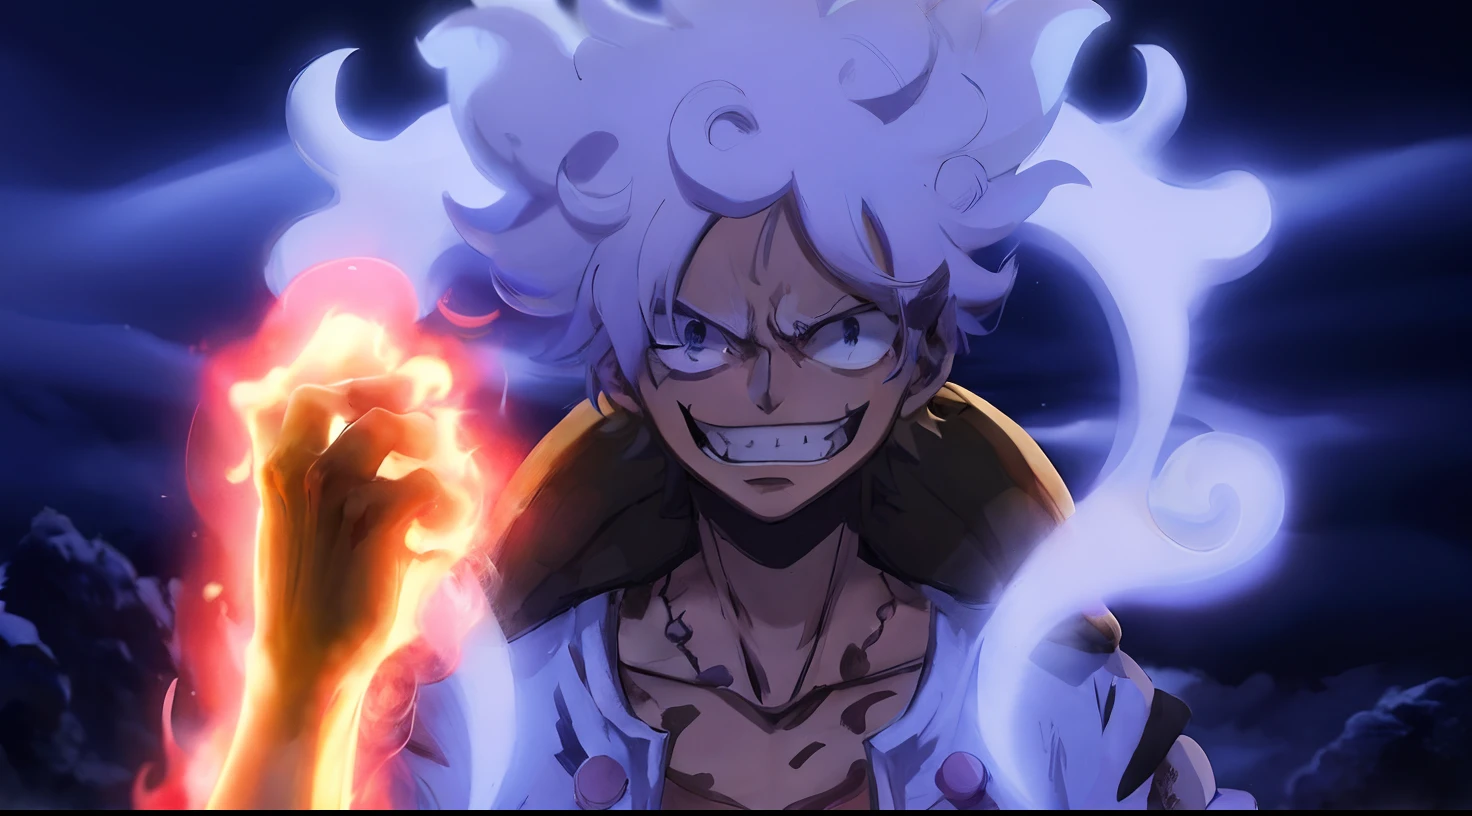 a man with white hair and a white beard holding a bright light, a silver haired mad, from one piece, otaku gangasta, Captura de tela de Black Clover, Engrenagem Luffy 5, offcial art, gyro zeppeli, closeup!!!!!!, news, Luffy, key anime art, Macaco D Luffy, Ohararyu, best anime character design, in the anime film